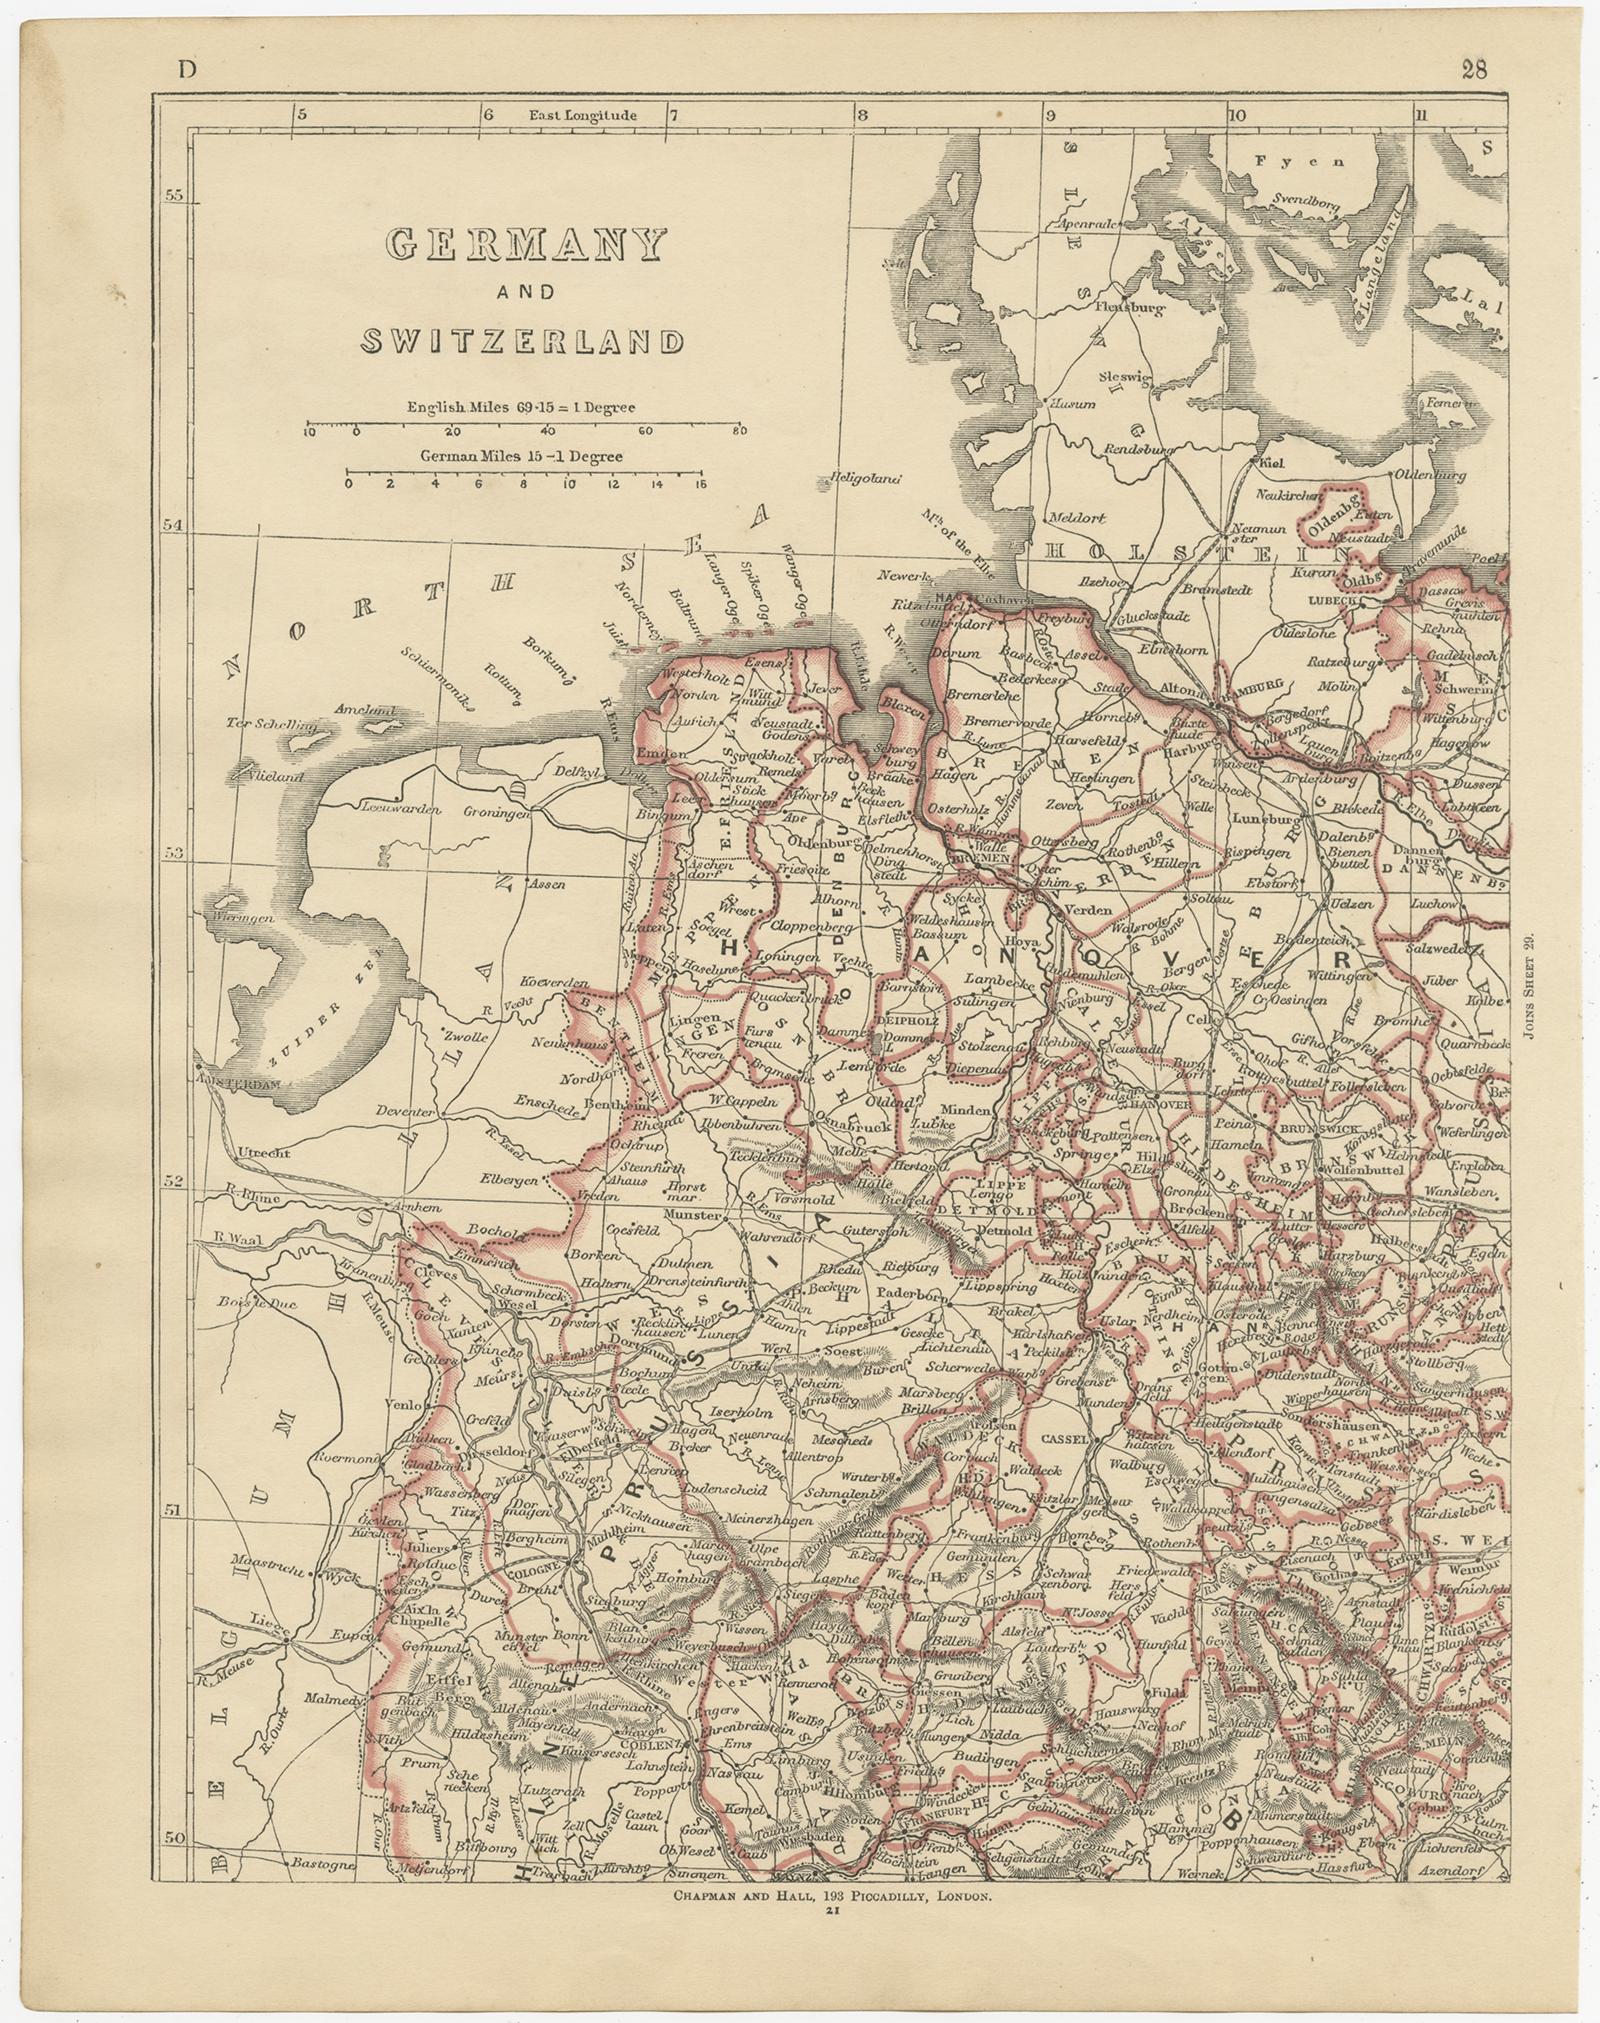 Antique map titled 'Germany and Switzerland'. Four individual sheets of Germany and Switzerland. This map originates from 'Lowry's Table Atlas constructed and engraved from the most recent Authorities' by J.W. Lowry. Published 1852.